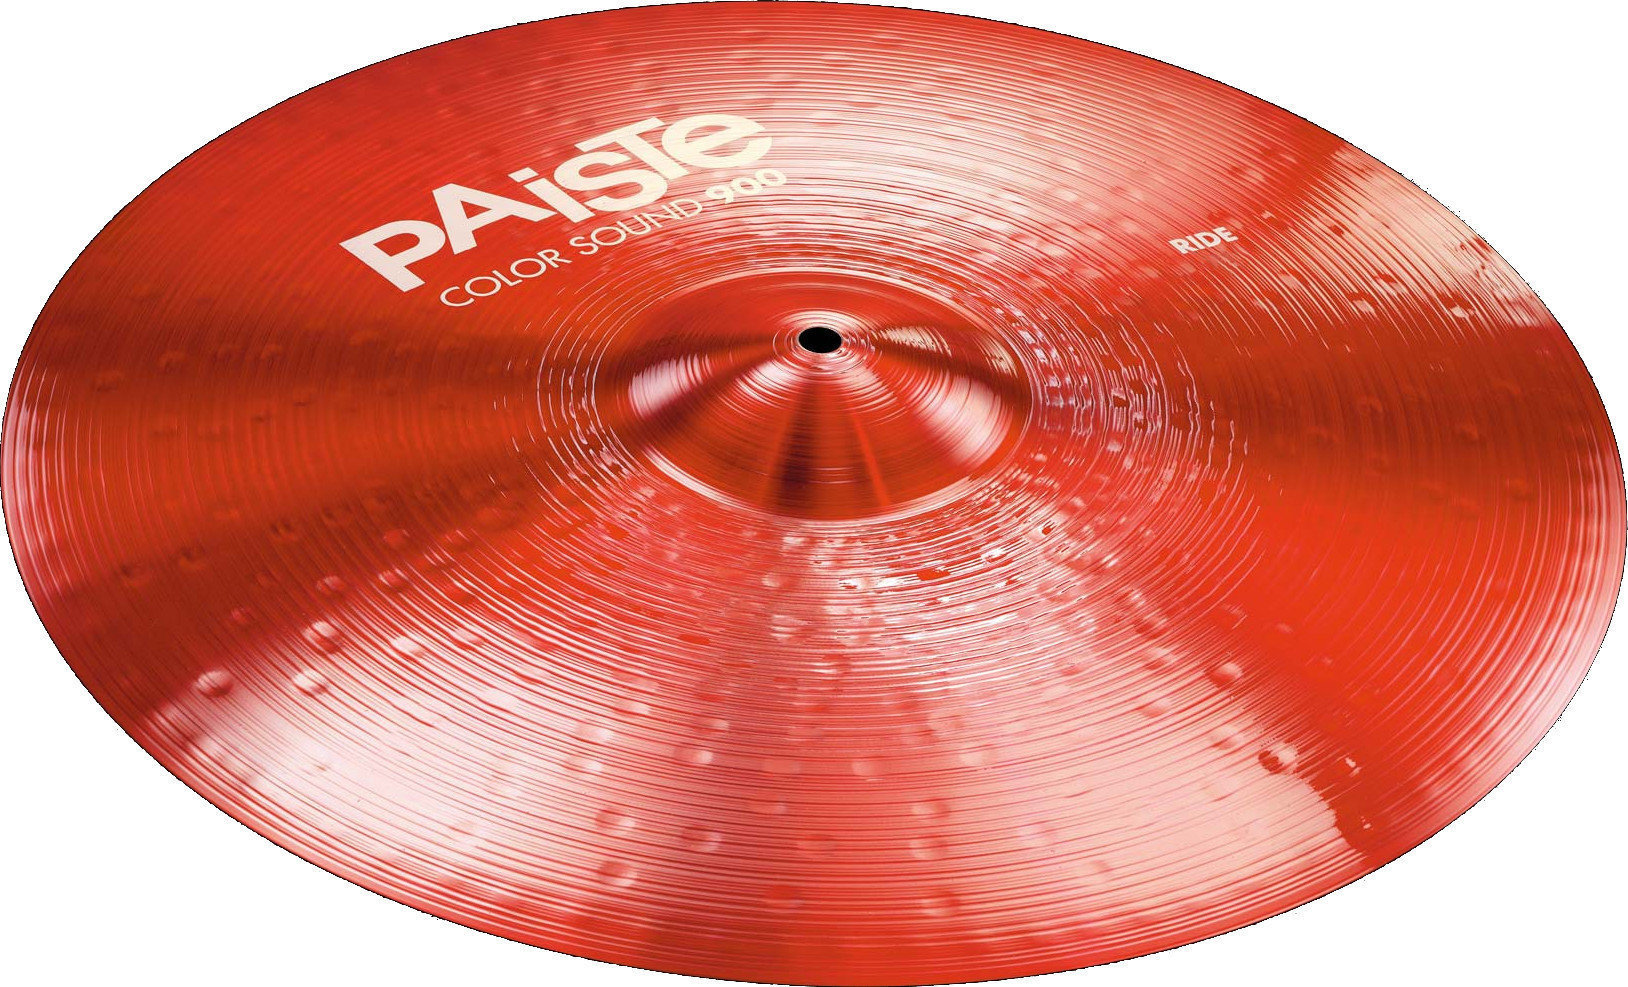 Ride Cymbal Paiste Color Sound 900 Ride Cymbal 22" Red